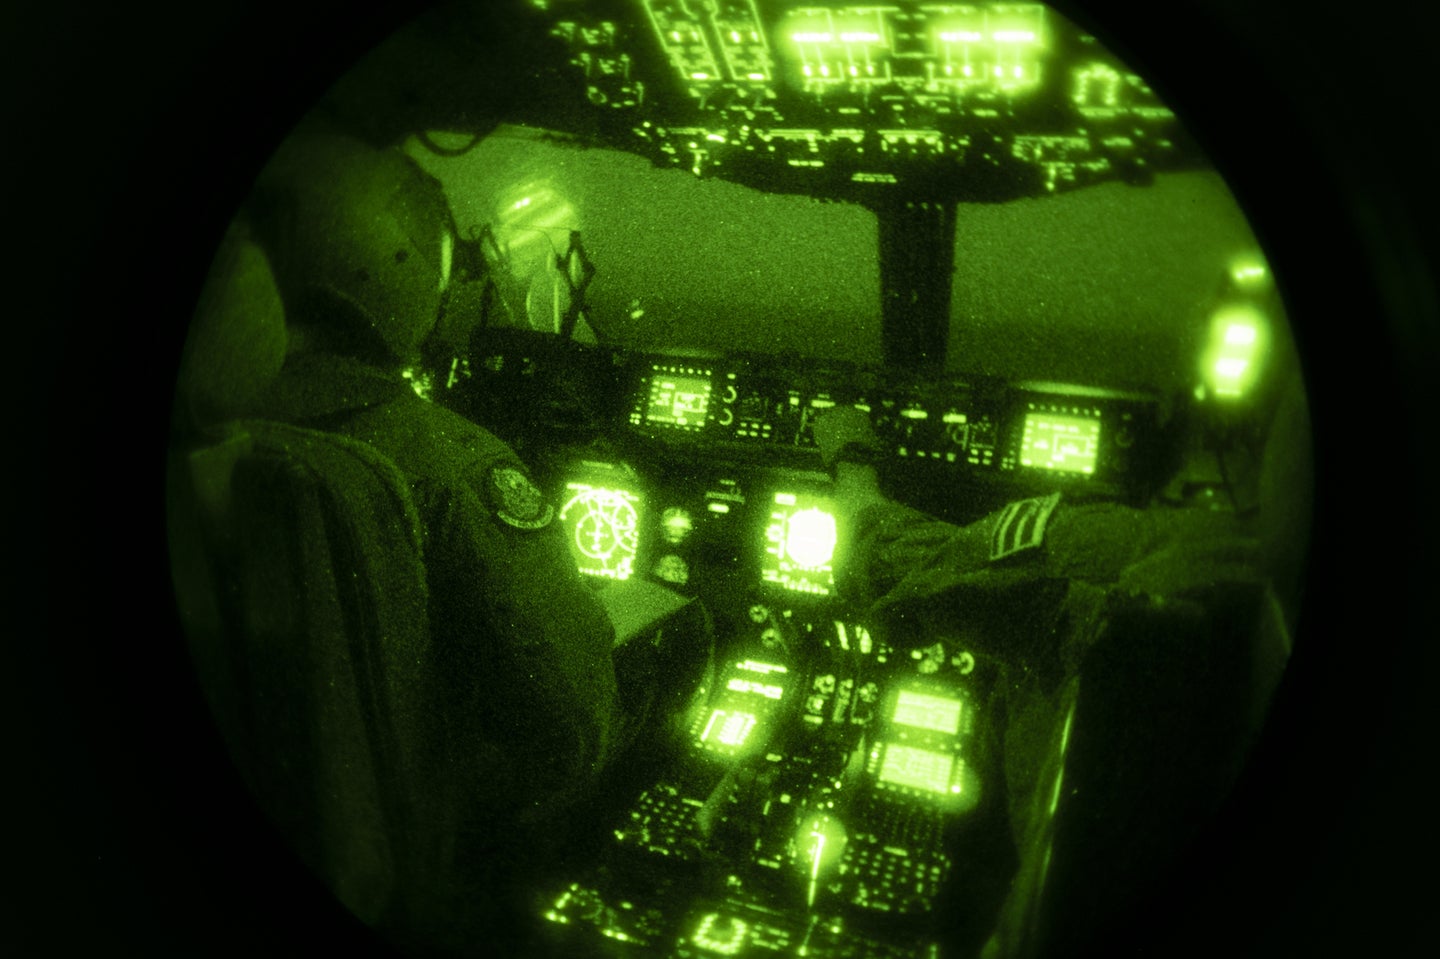 Night vision goggles in use on a C-17 aircraft in Hawaii in February.